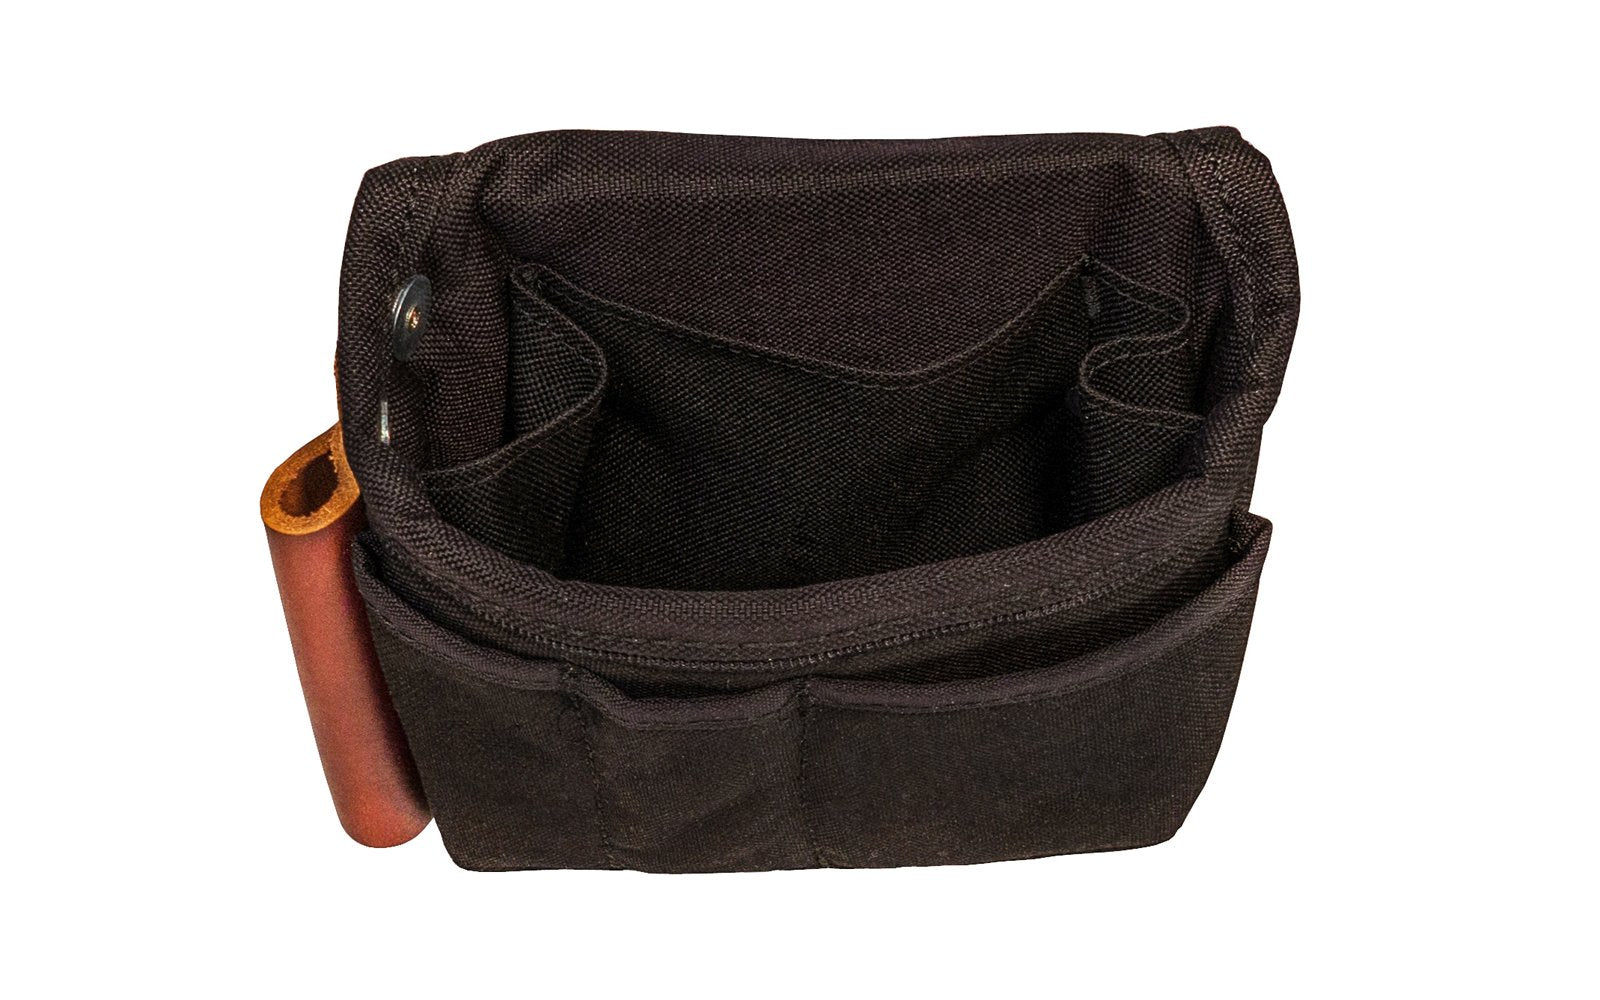 Occidental Leather Task Pouch ~ 9512 - Made in USA ~ Compact pouch for small tasks - Features 8 pockets - Task Pouch provides holders for your tape measure, spiral pad, pens & pencils, screw driver, utility knife, & pliers - Made of durable Cordura material with a foam core - Fits up to a 2" work belt - Eight Pouches - Occidental